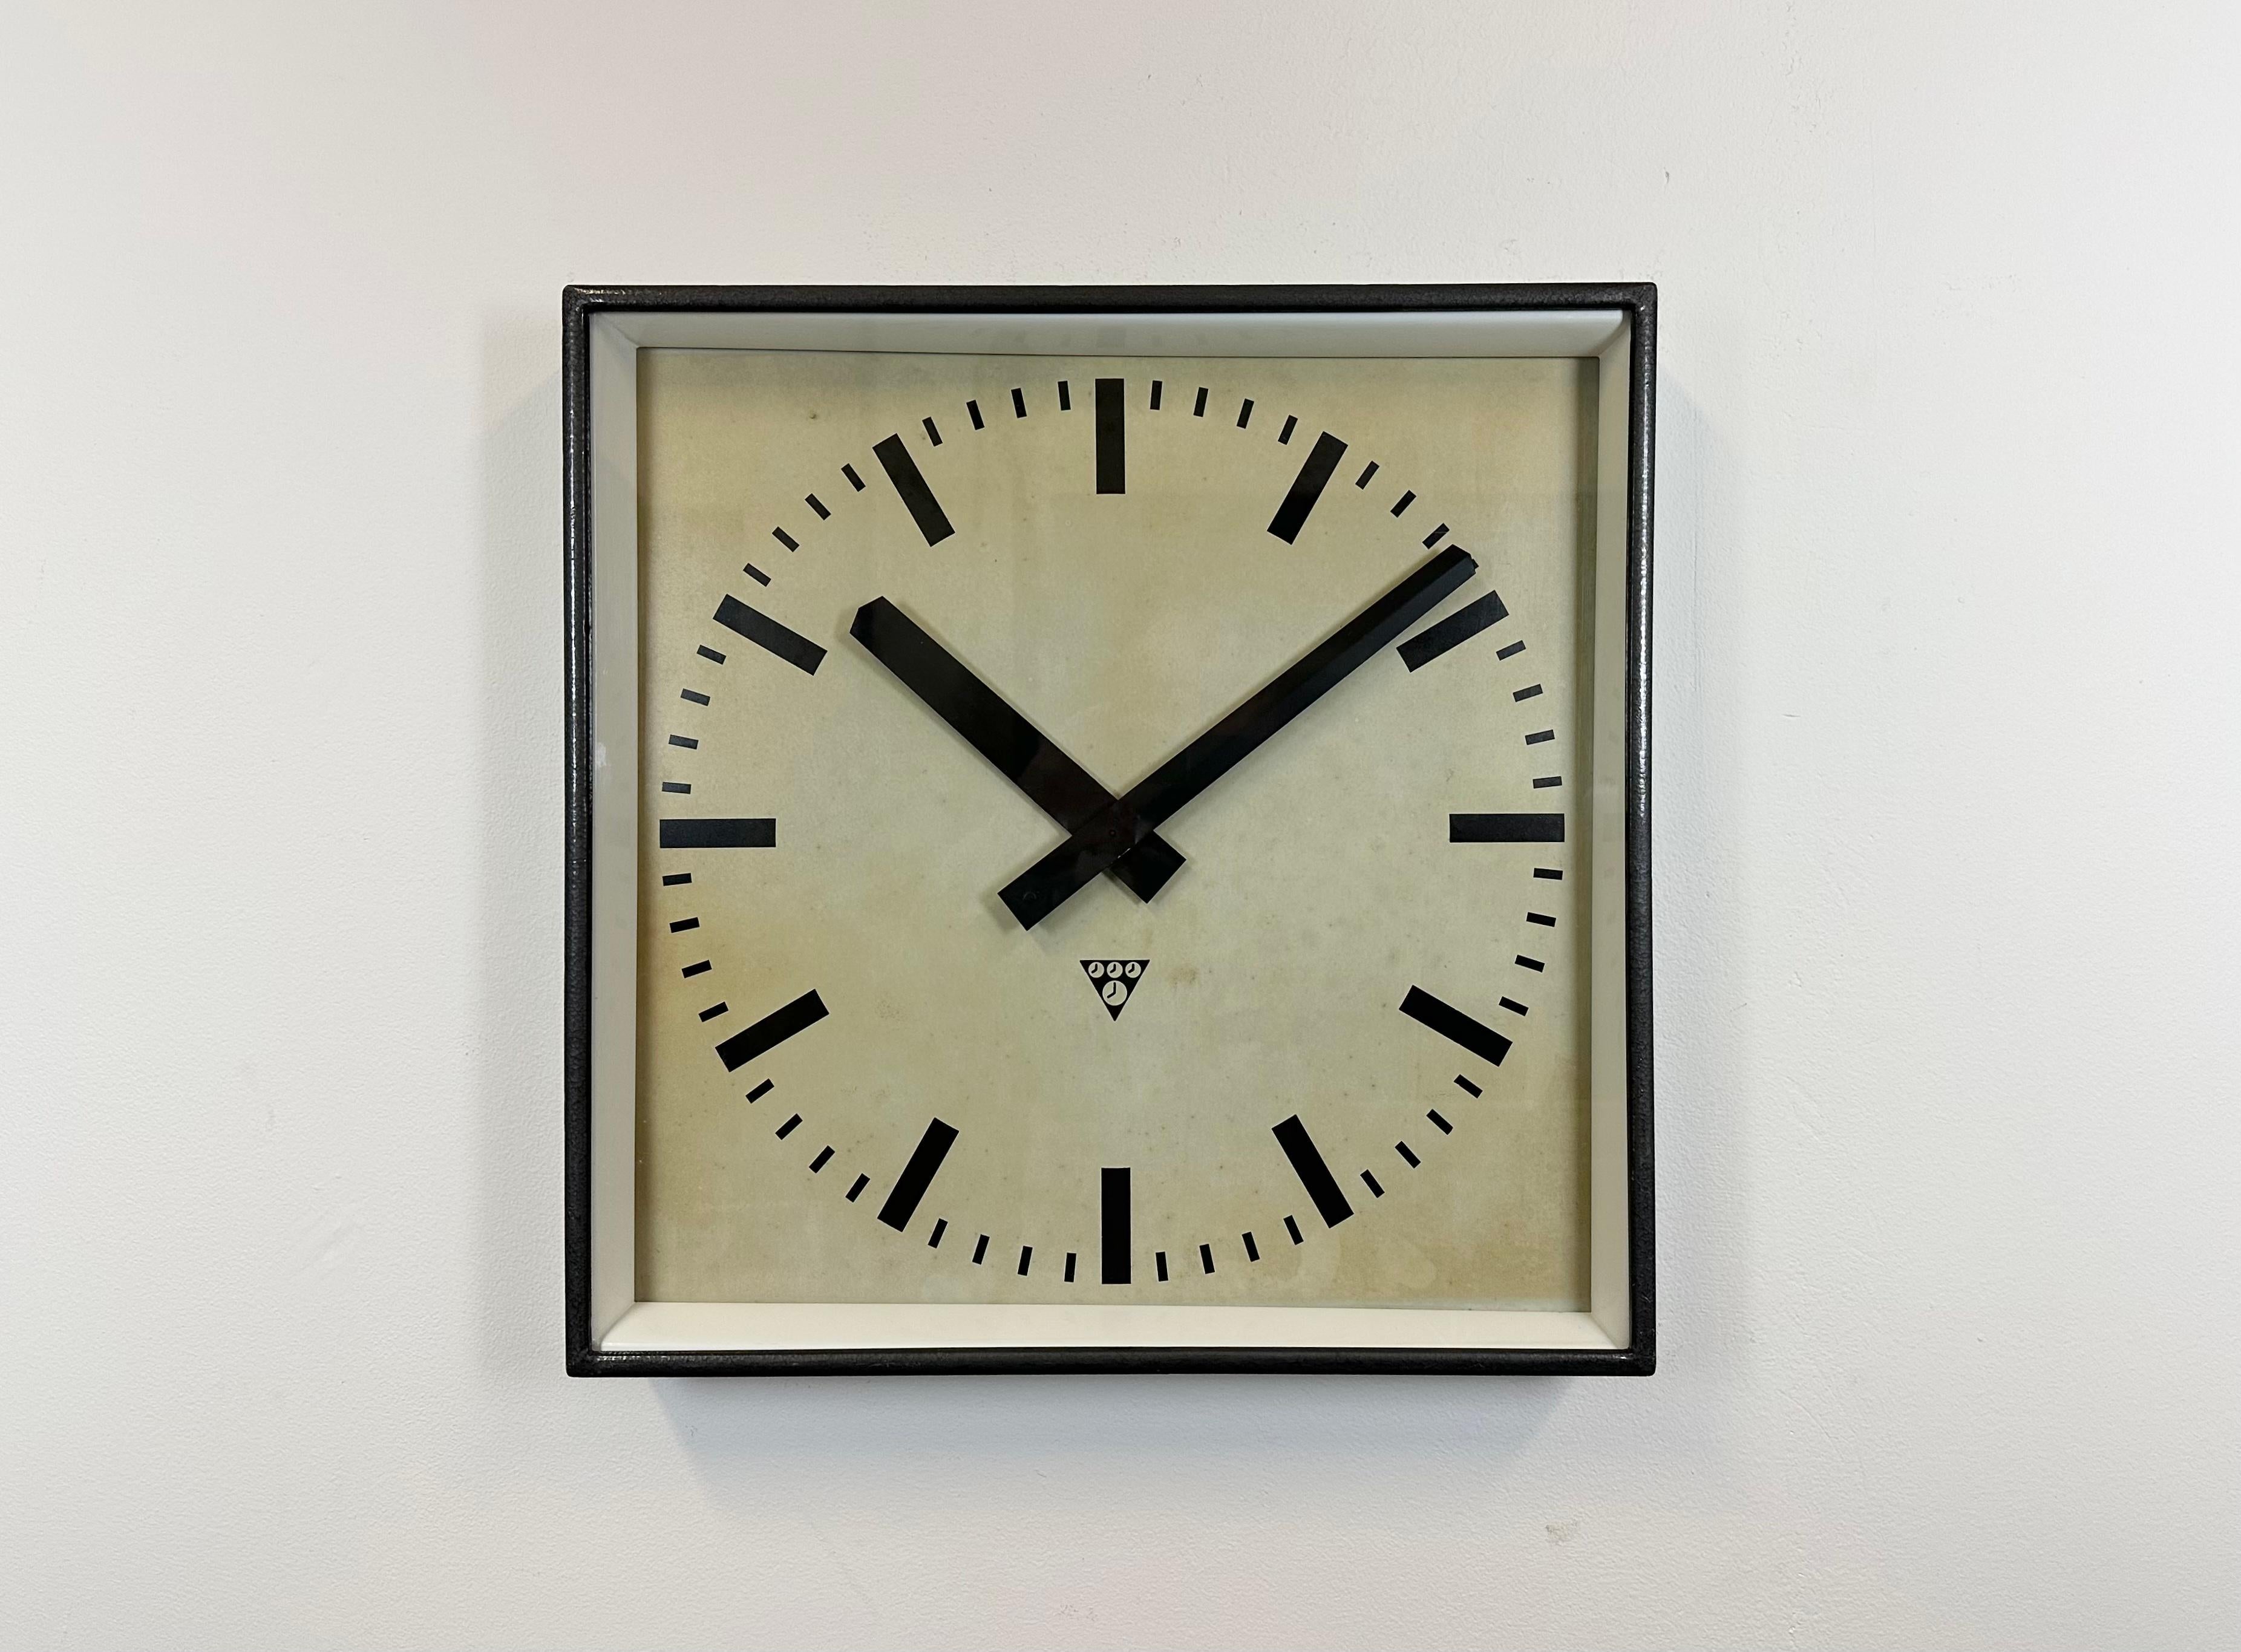 - Clock made by Pragotron in former Czechoslovakia during the 1960s.
- Was used in factories, schools & railway stations.
- Features a dark gray hammer paint finish iron body, metal dial, clear glass.
- Has been converted into a battery-powered